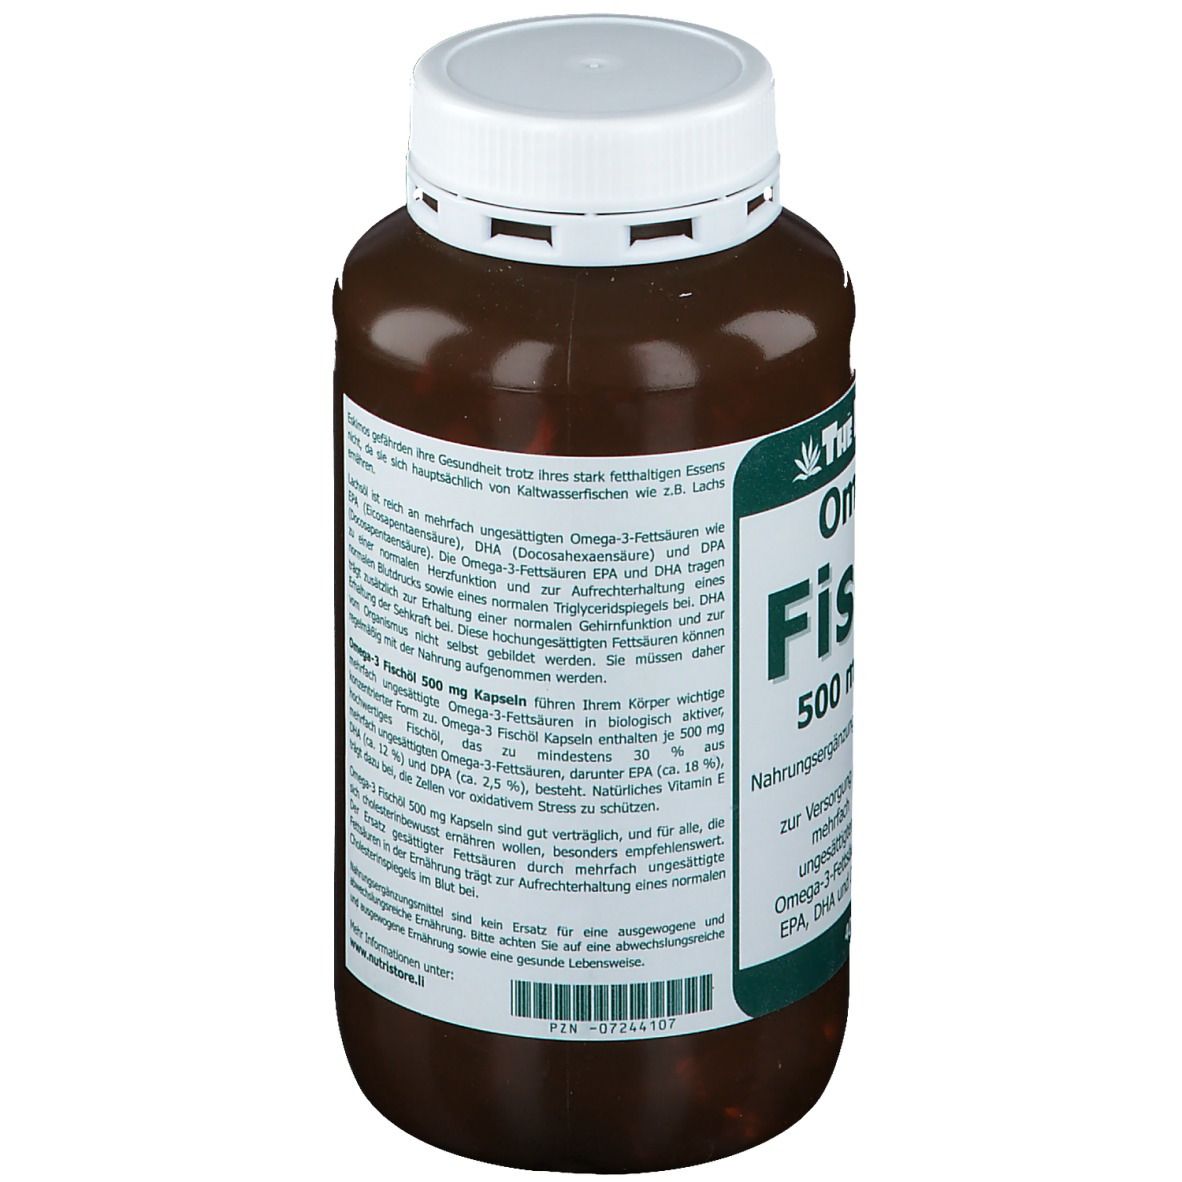 The Nutri Store Omega-3 Fischöl 500mg